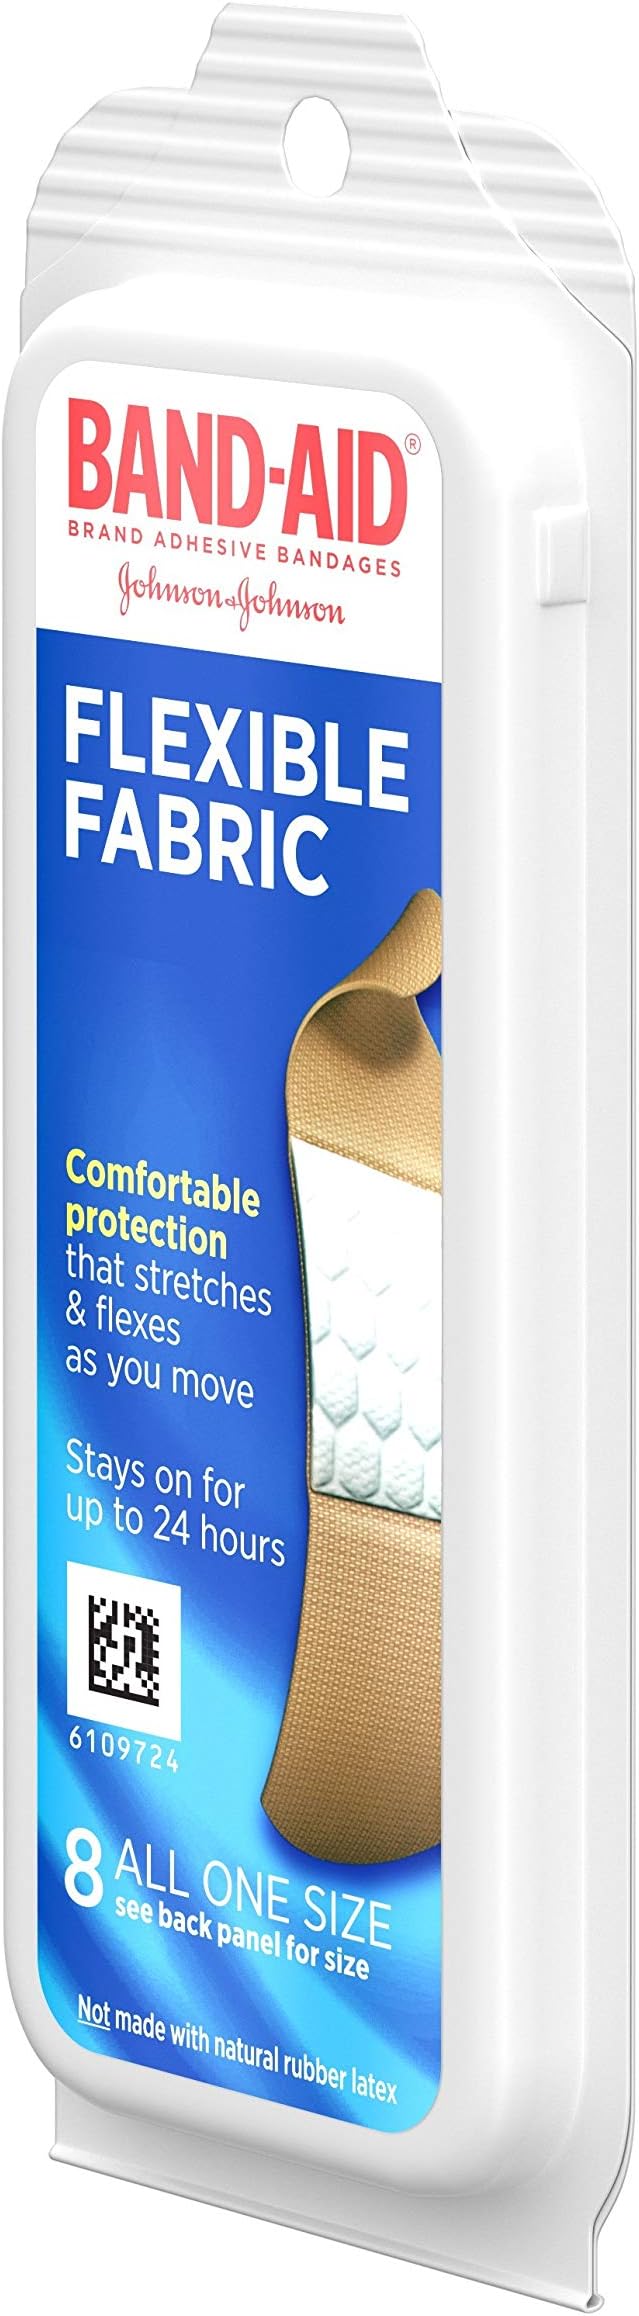 Flexible Fabric Bandages Travel Pack | Band-Aid® | 8 Count